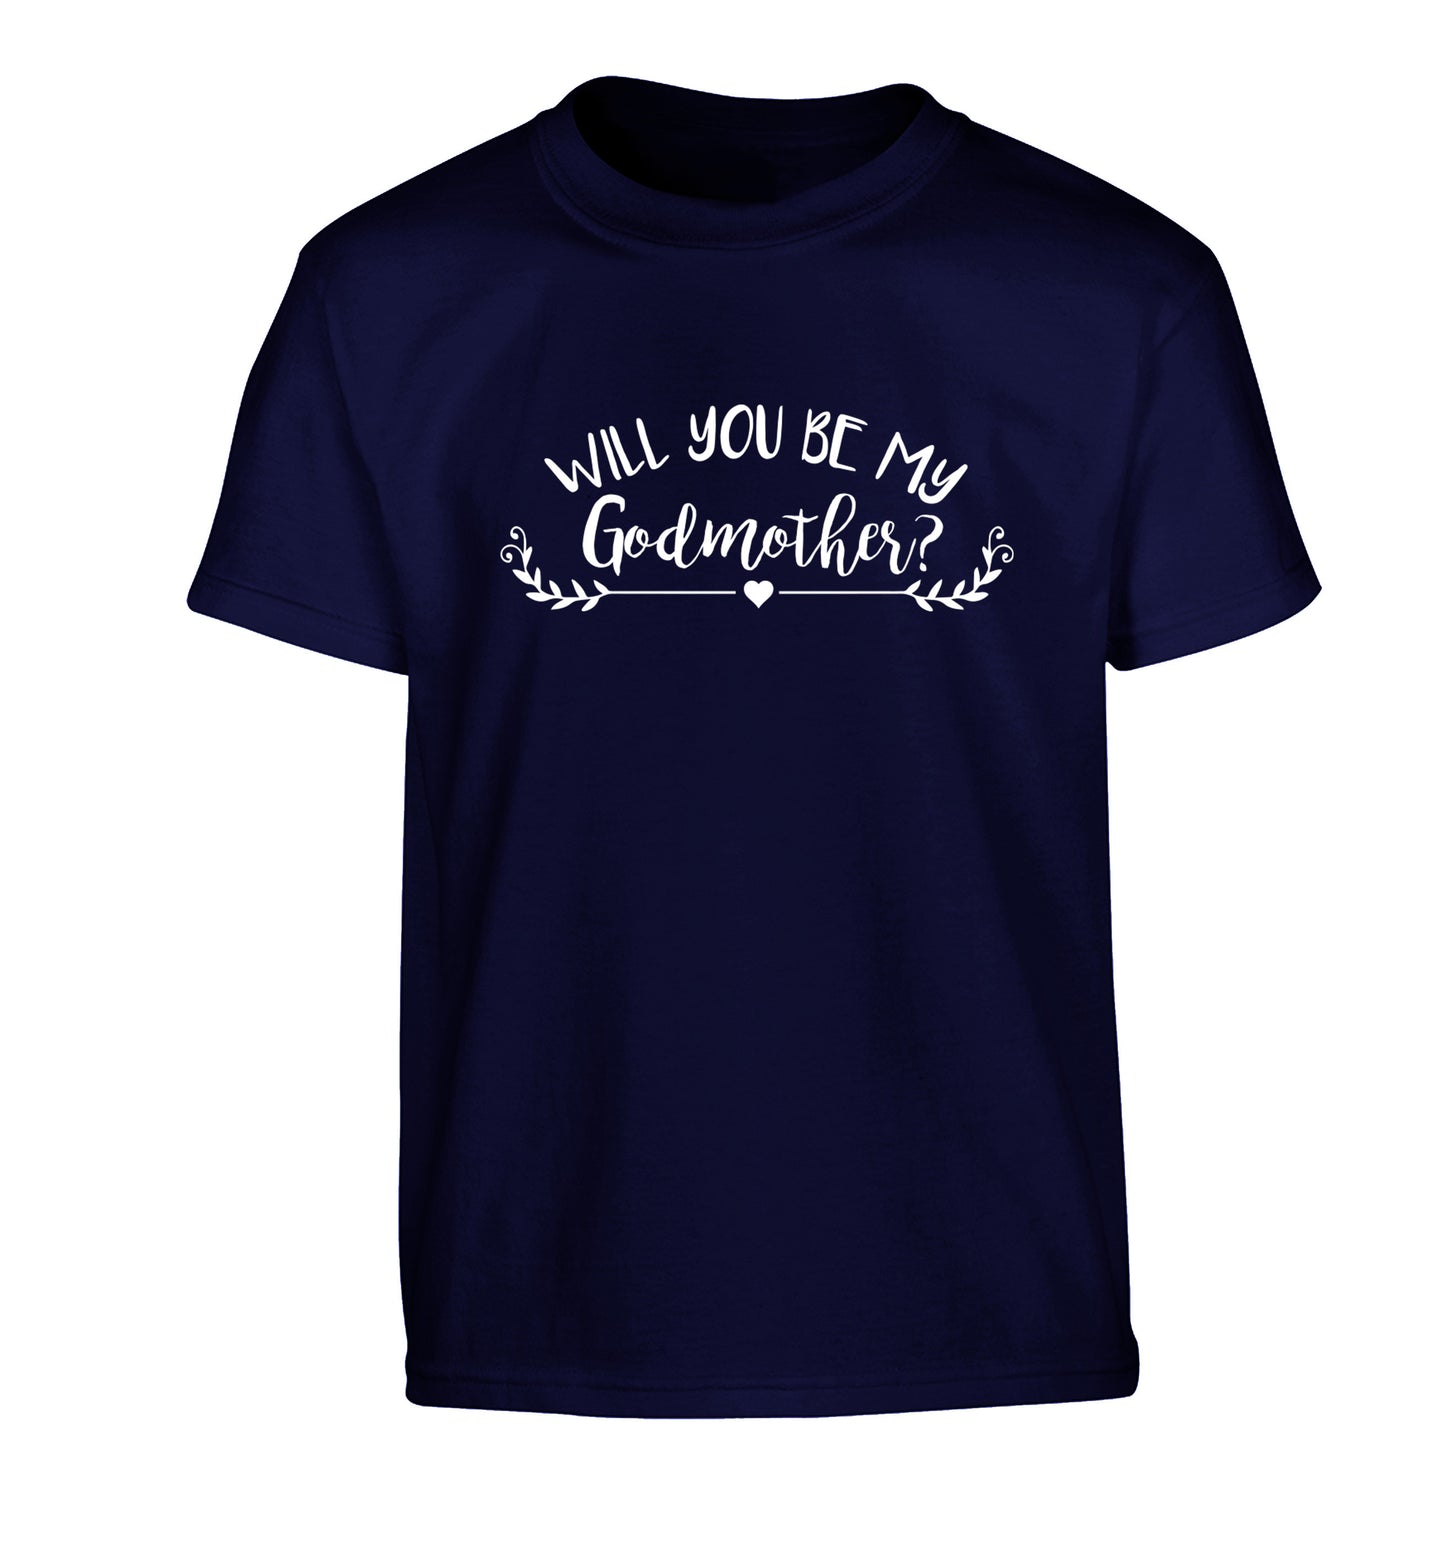 Will you be my godmother? Children's navy Tshirt 12-14 Years